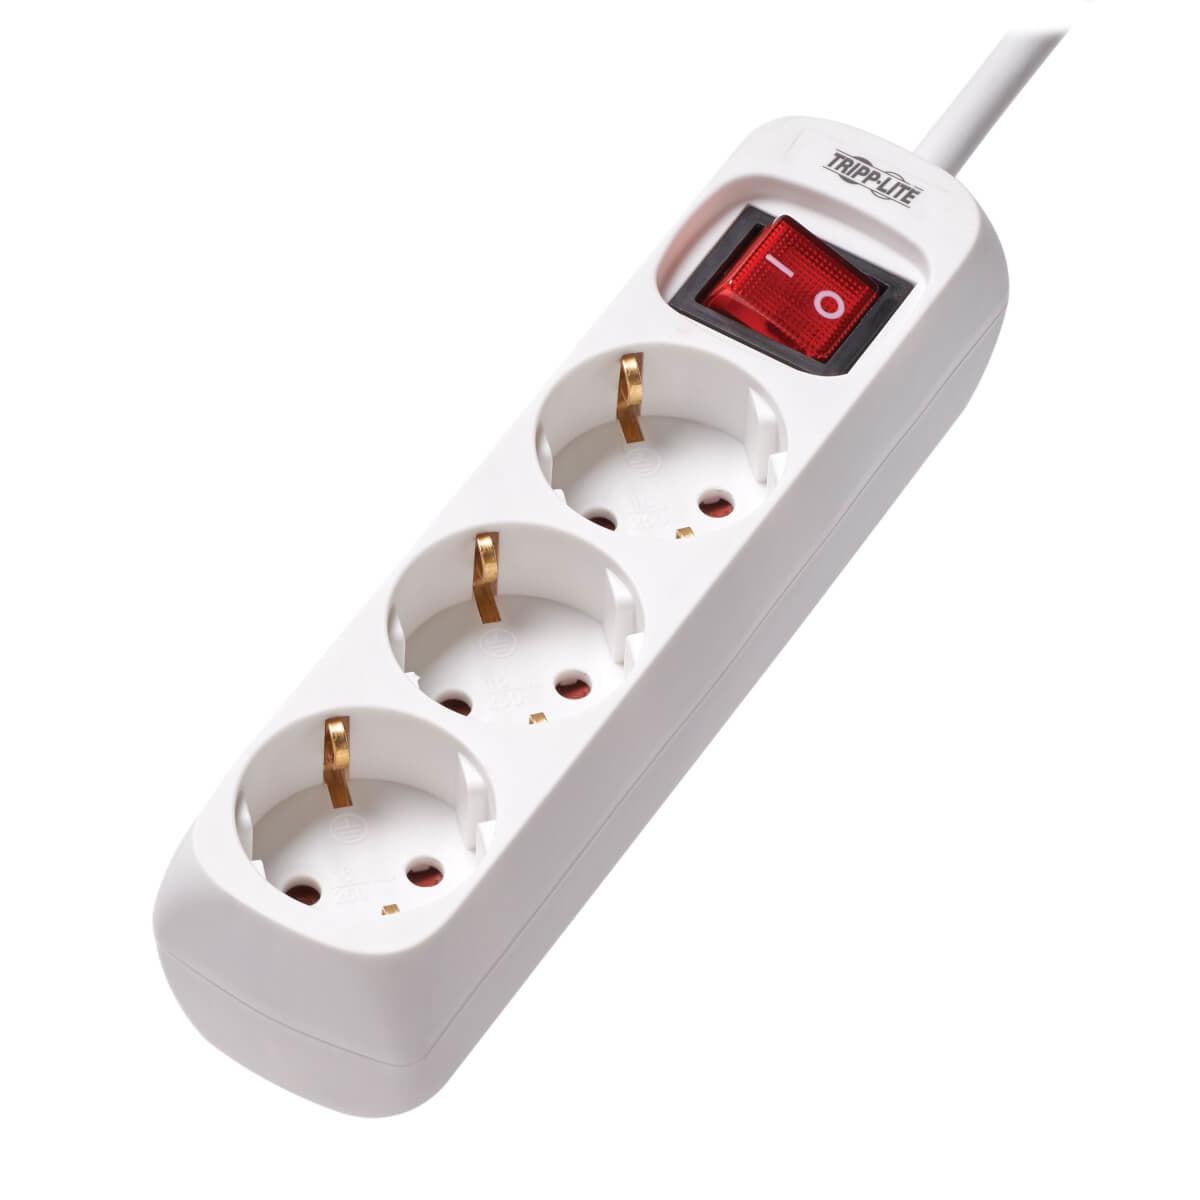 Tripp Lite Ps3G15 3-Outlet Power Strip - German Type F Schuko Outlets, 220-250V, 16A, 1.5 M Cord, Schuko Plug, White